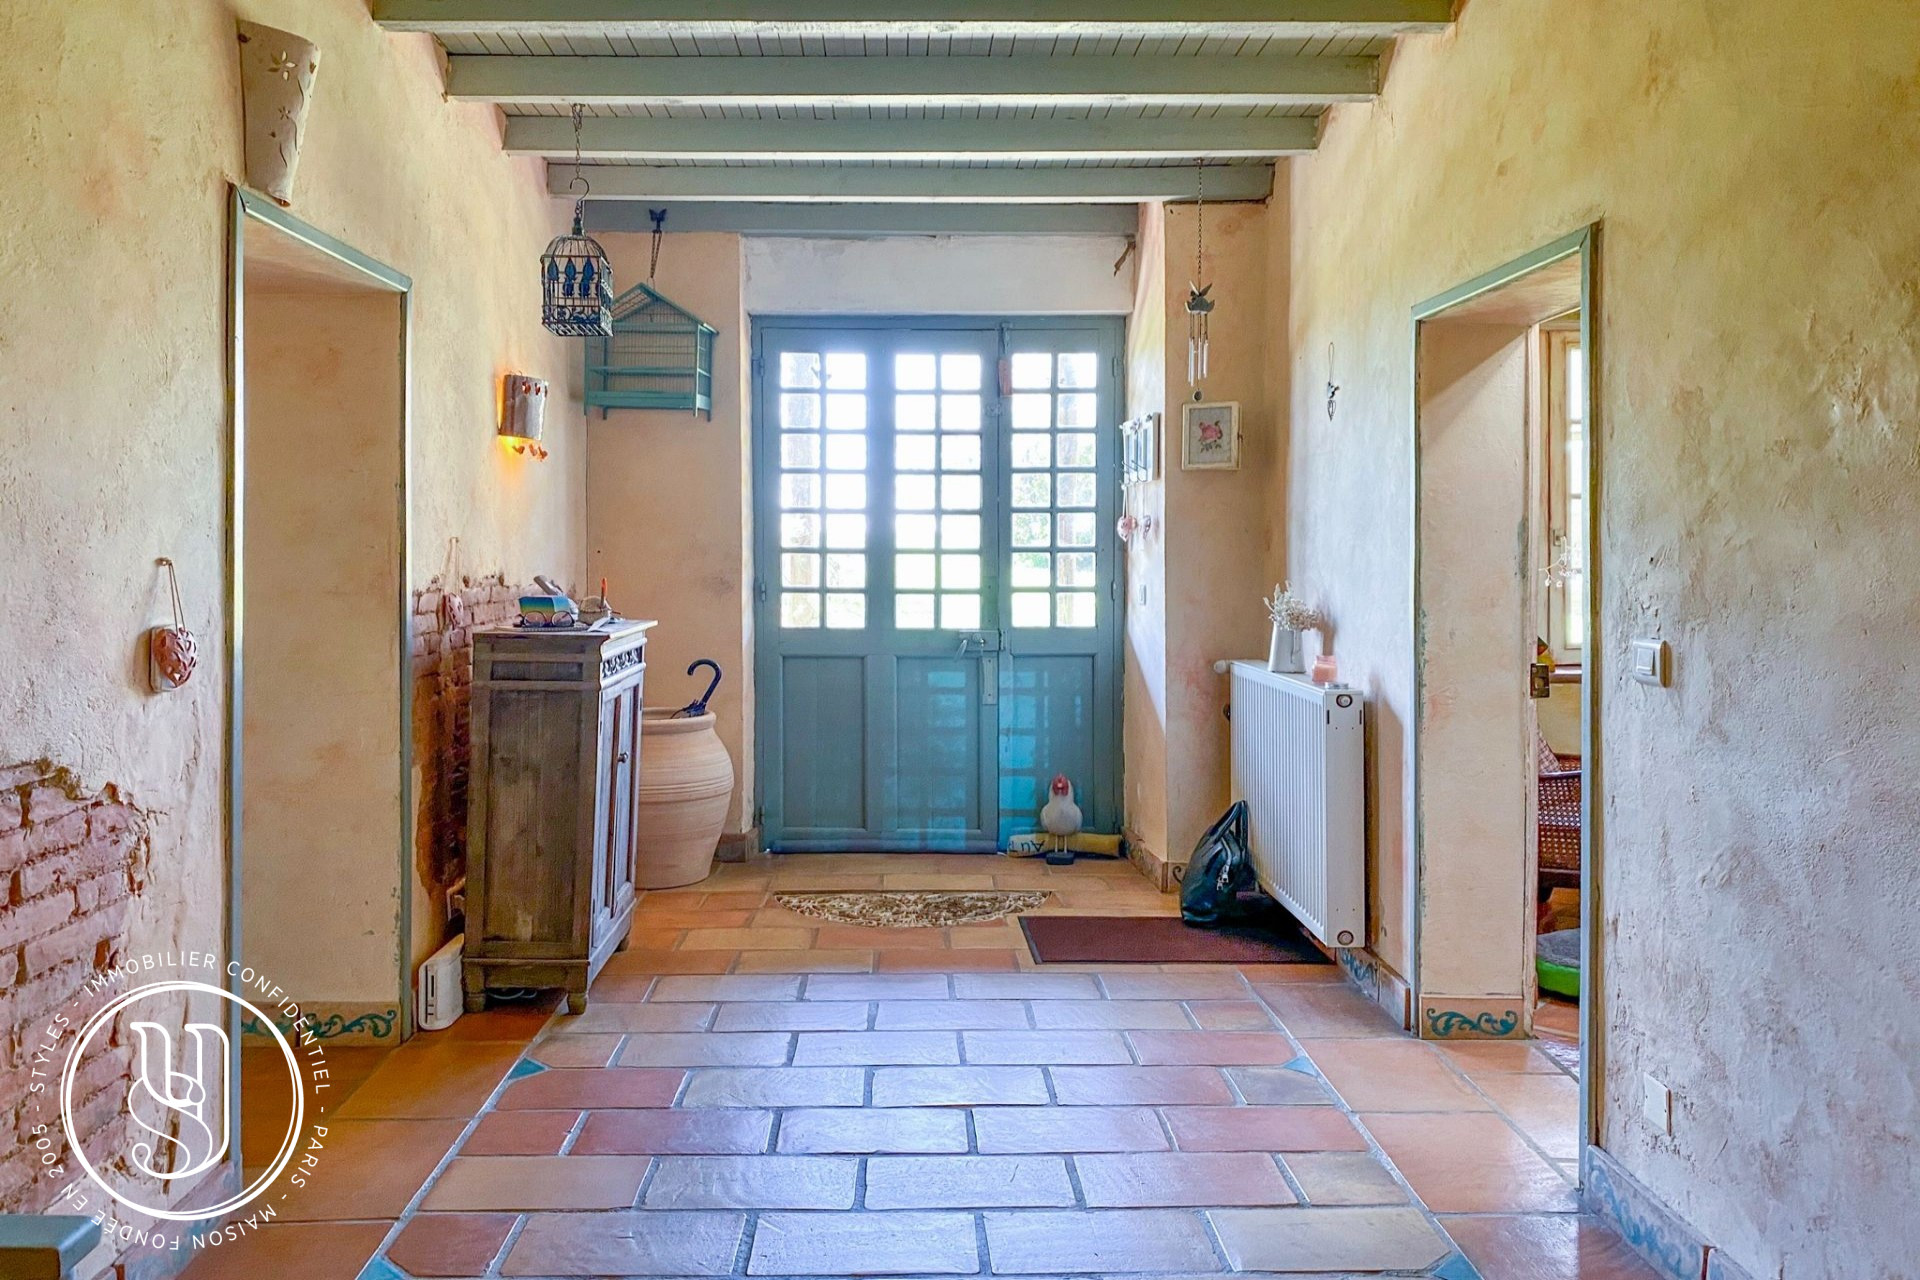 Toulouse - under offer, A superb farmhouse in the heart of 12 hectares of - image 11